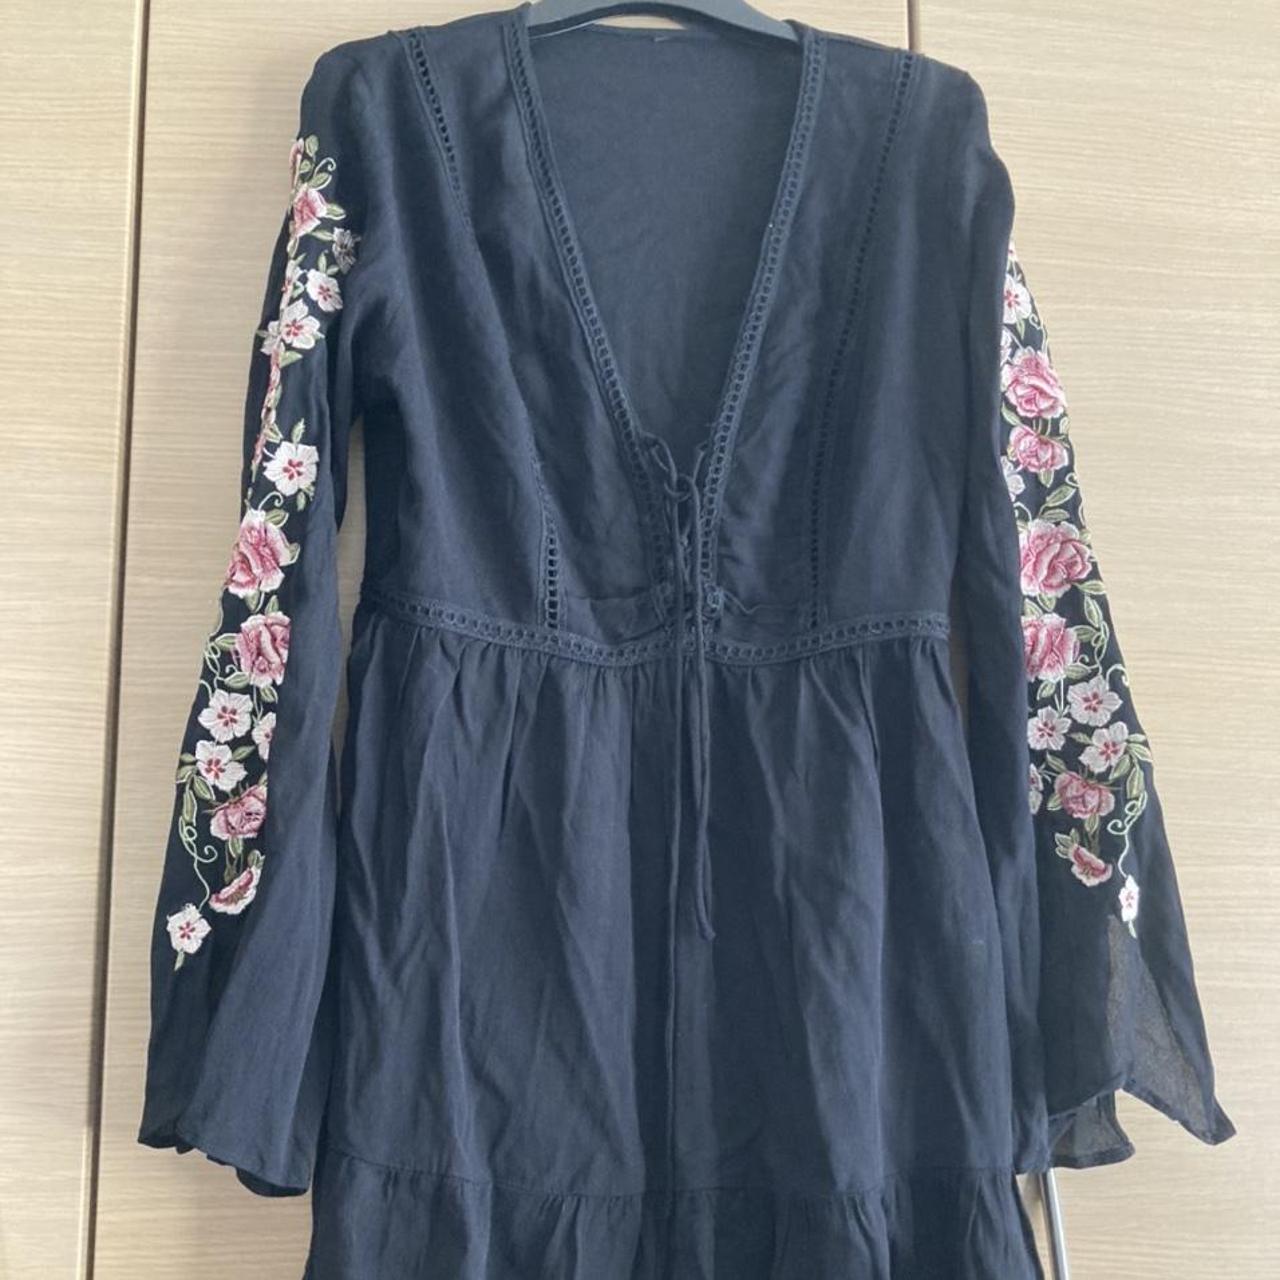 Beautiful thin black summer dress with embroidered... - Depop